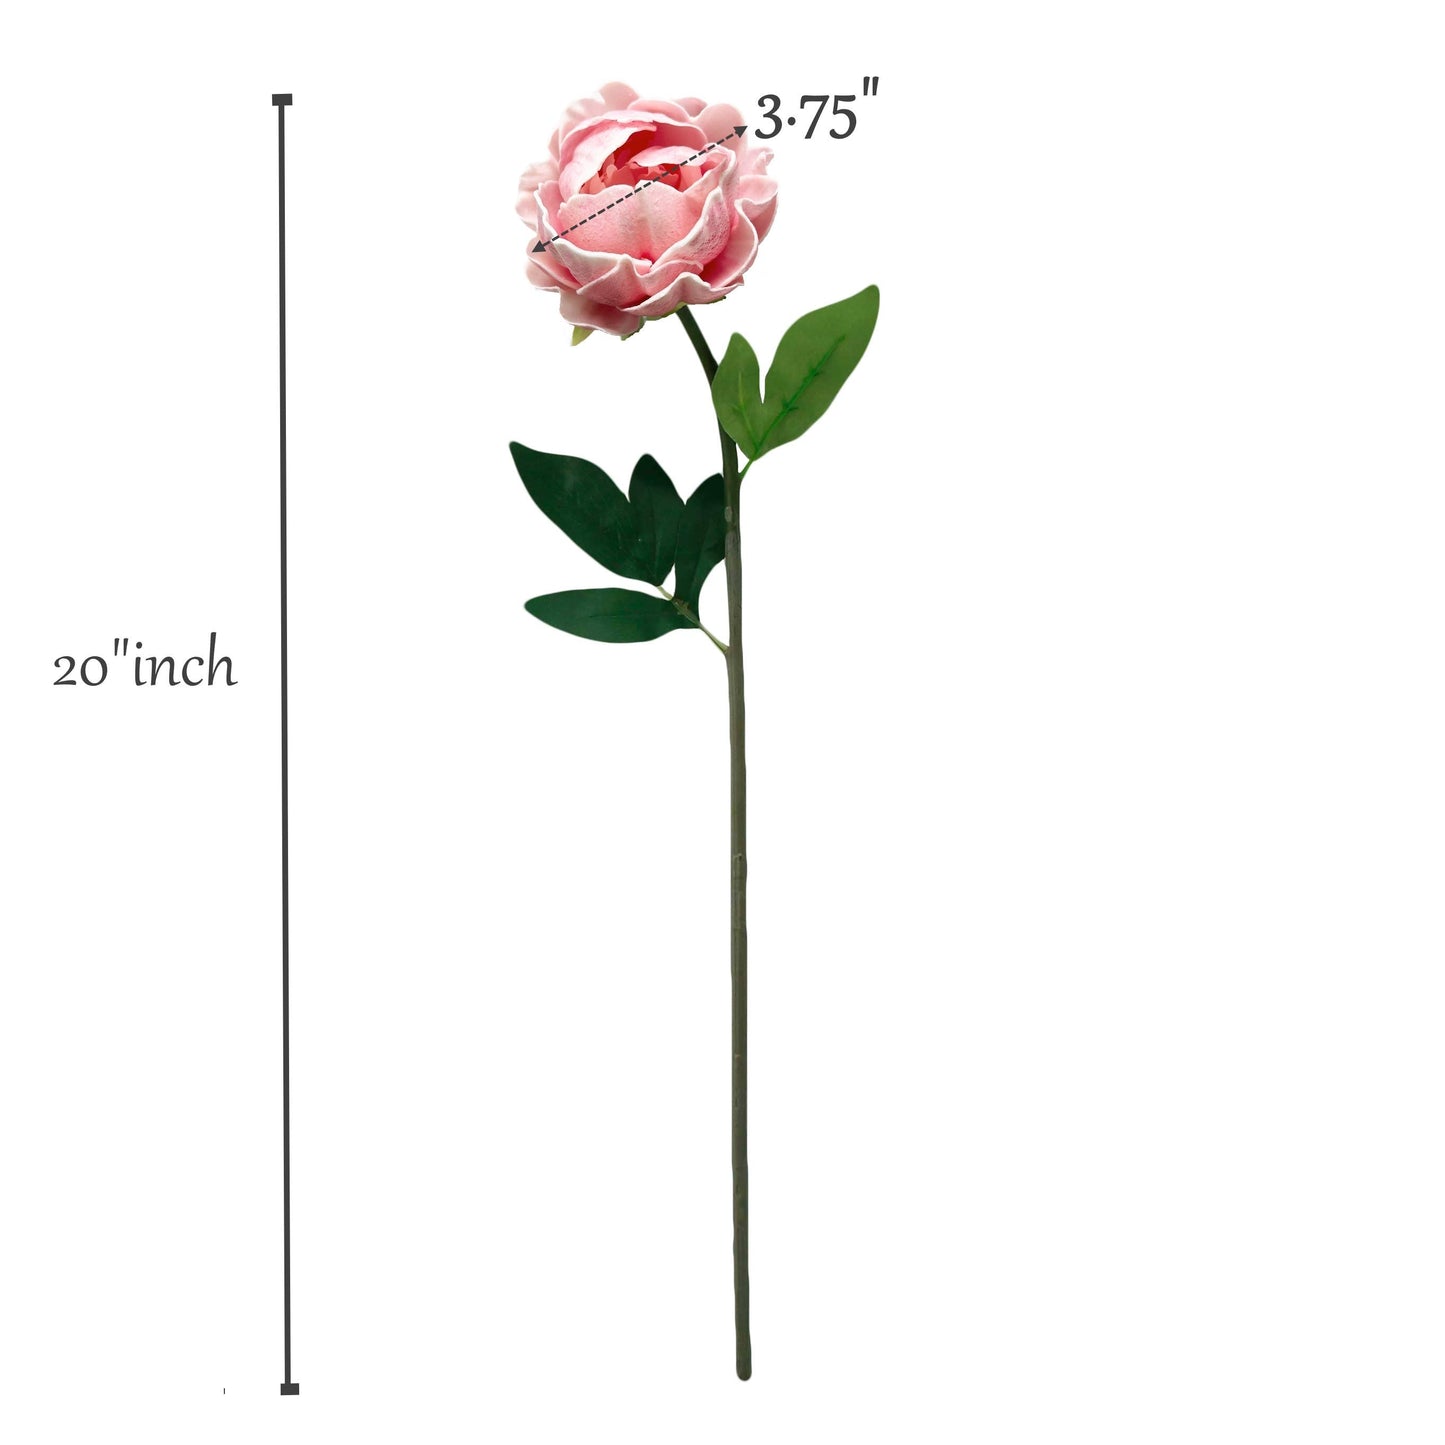 20"Real Touch Peony Stem